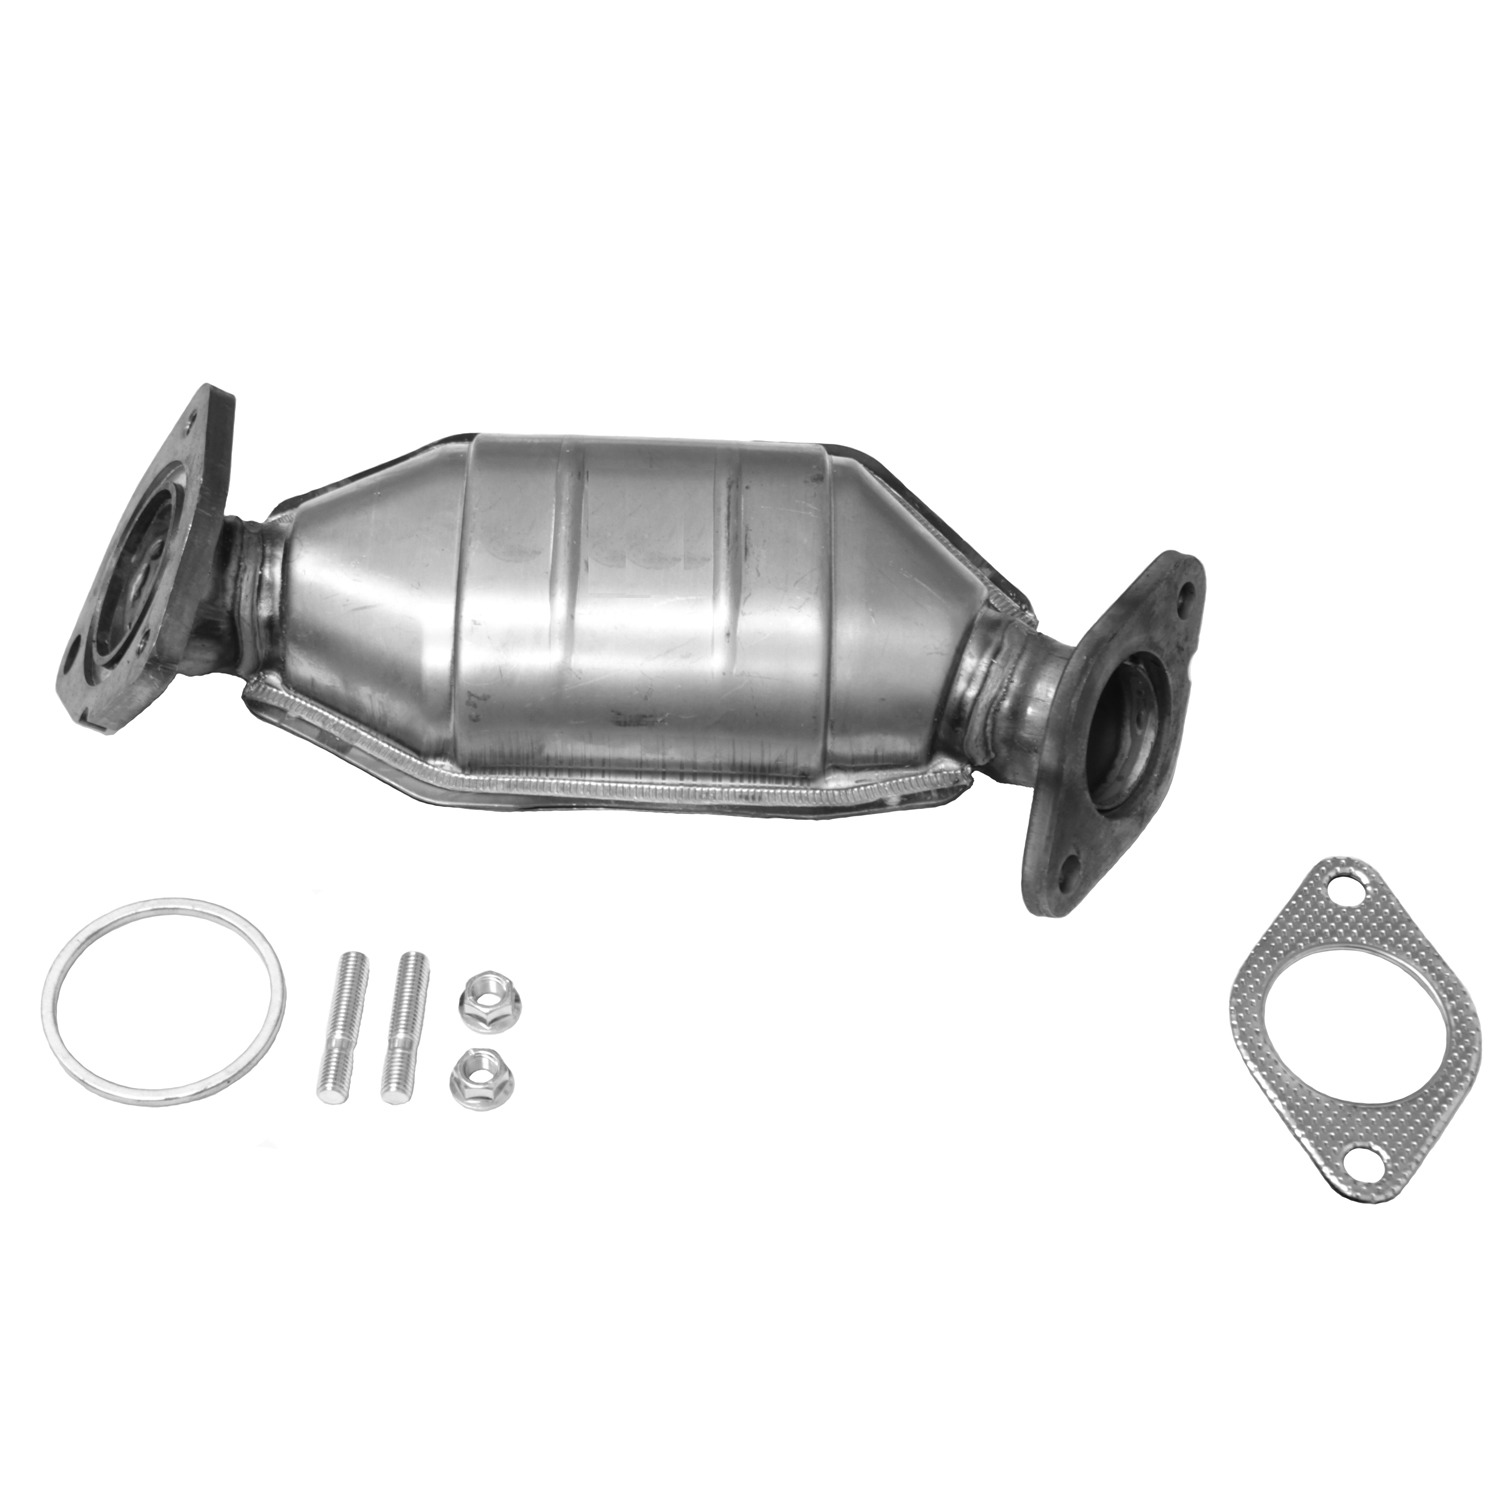 2008 - 2015 Buick Enclave/2009 - 2015 Chevrolet Traverse/2007 - 2016 GMC Acadia/2007 - 2010 Saturn Outlook 3.6L Front Right Catalytic Converter